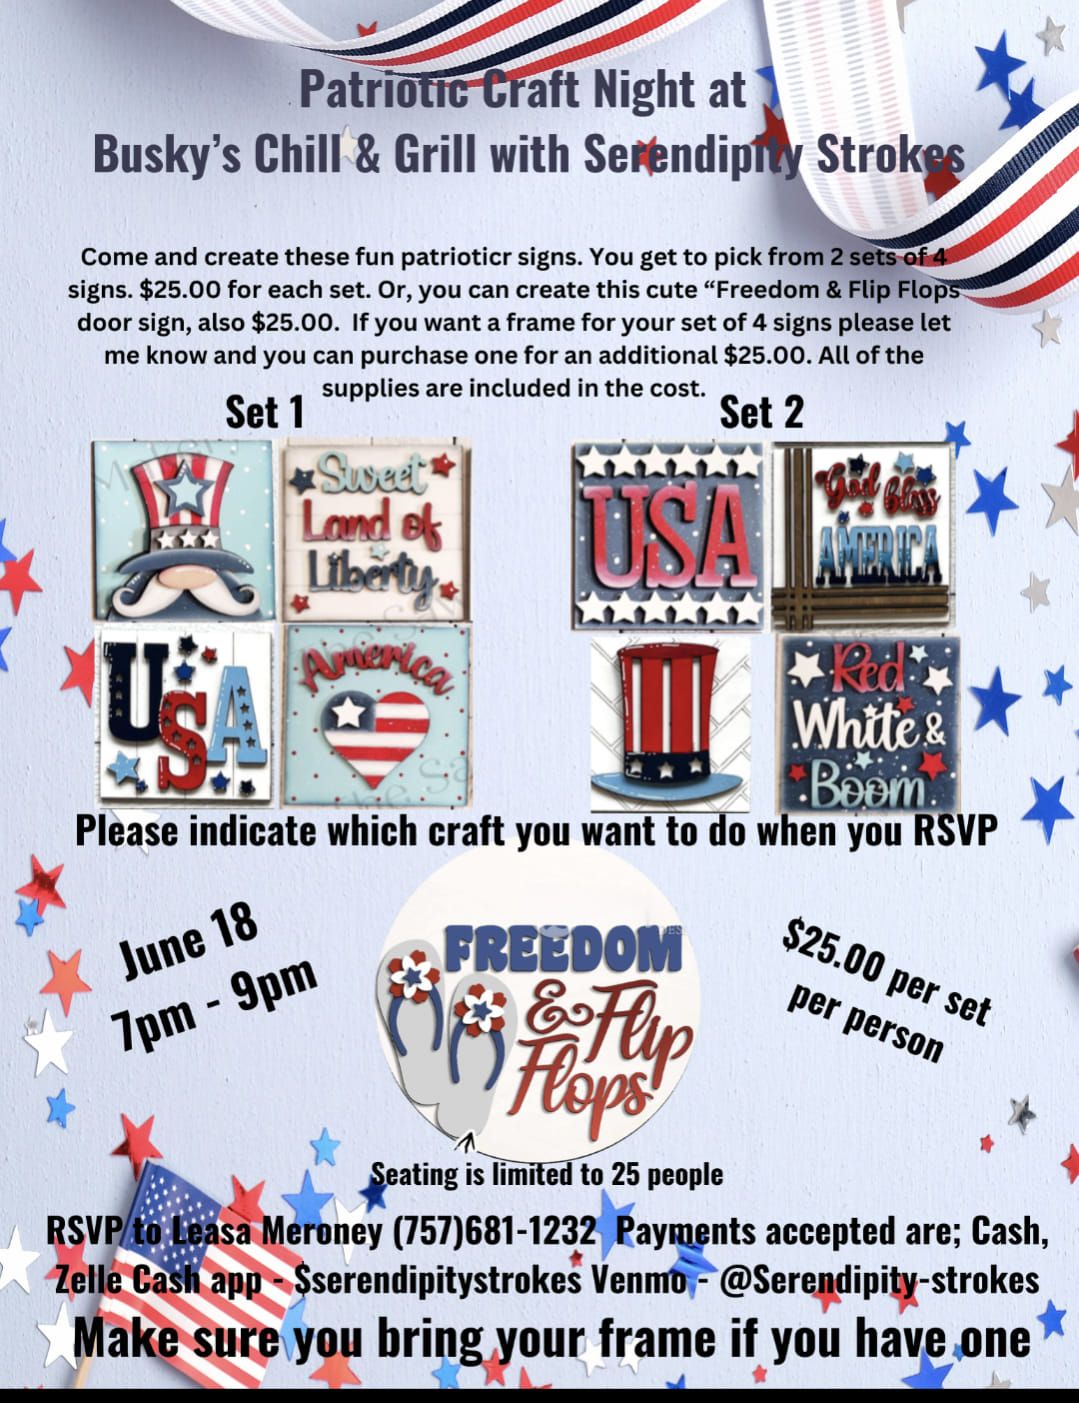 Patriotic Craft Night At Busky's Chill & Grill with Serendipity Strokes 